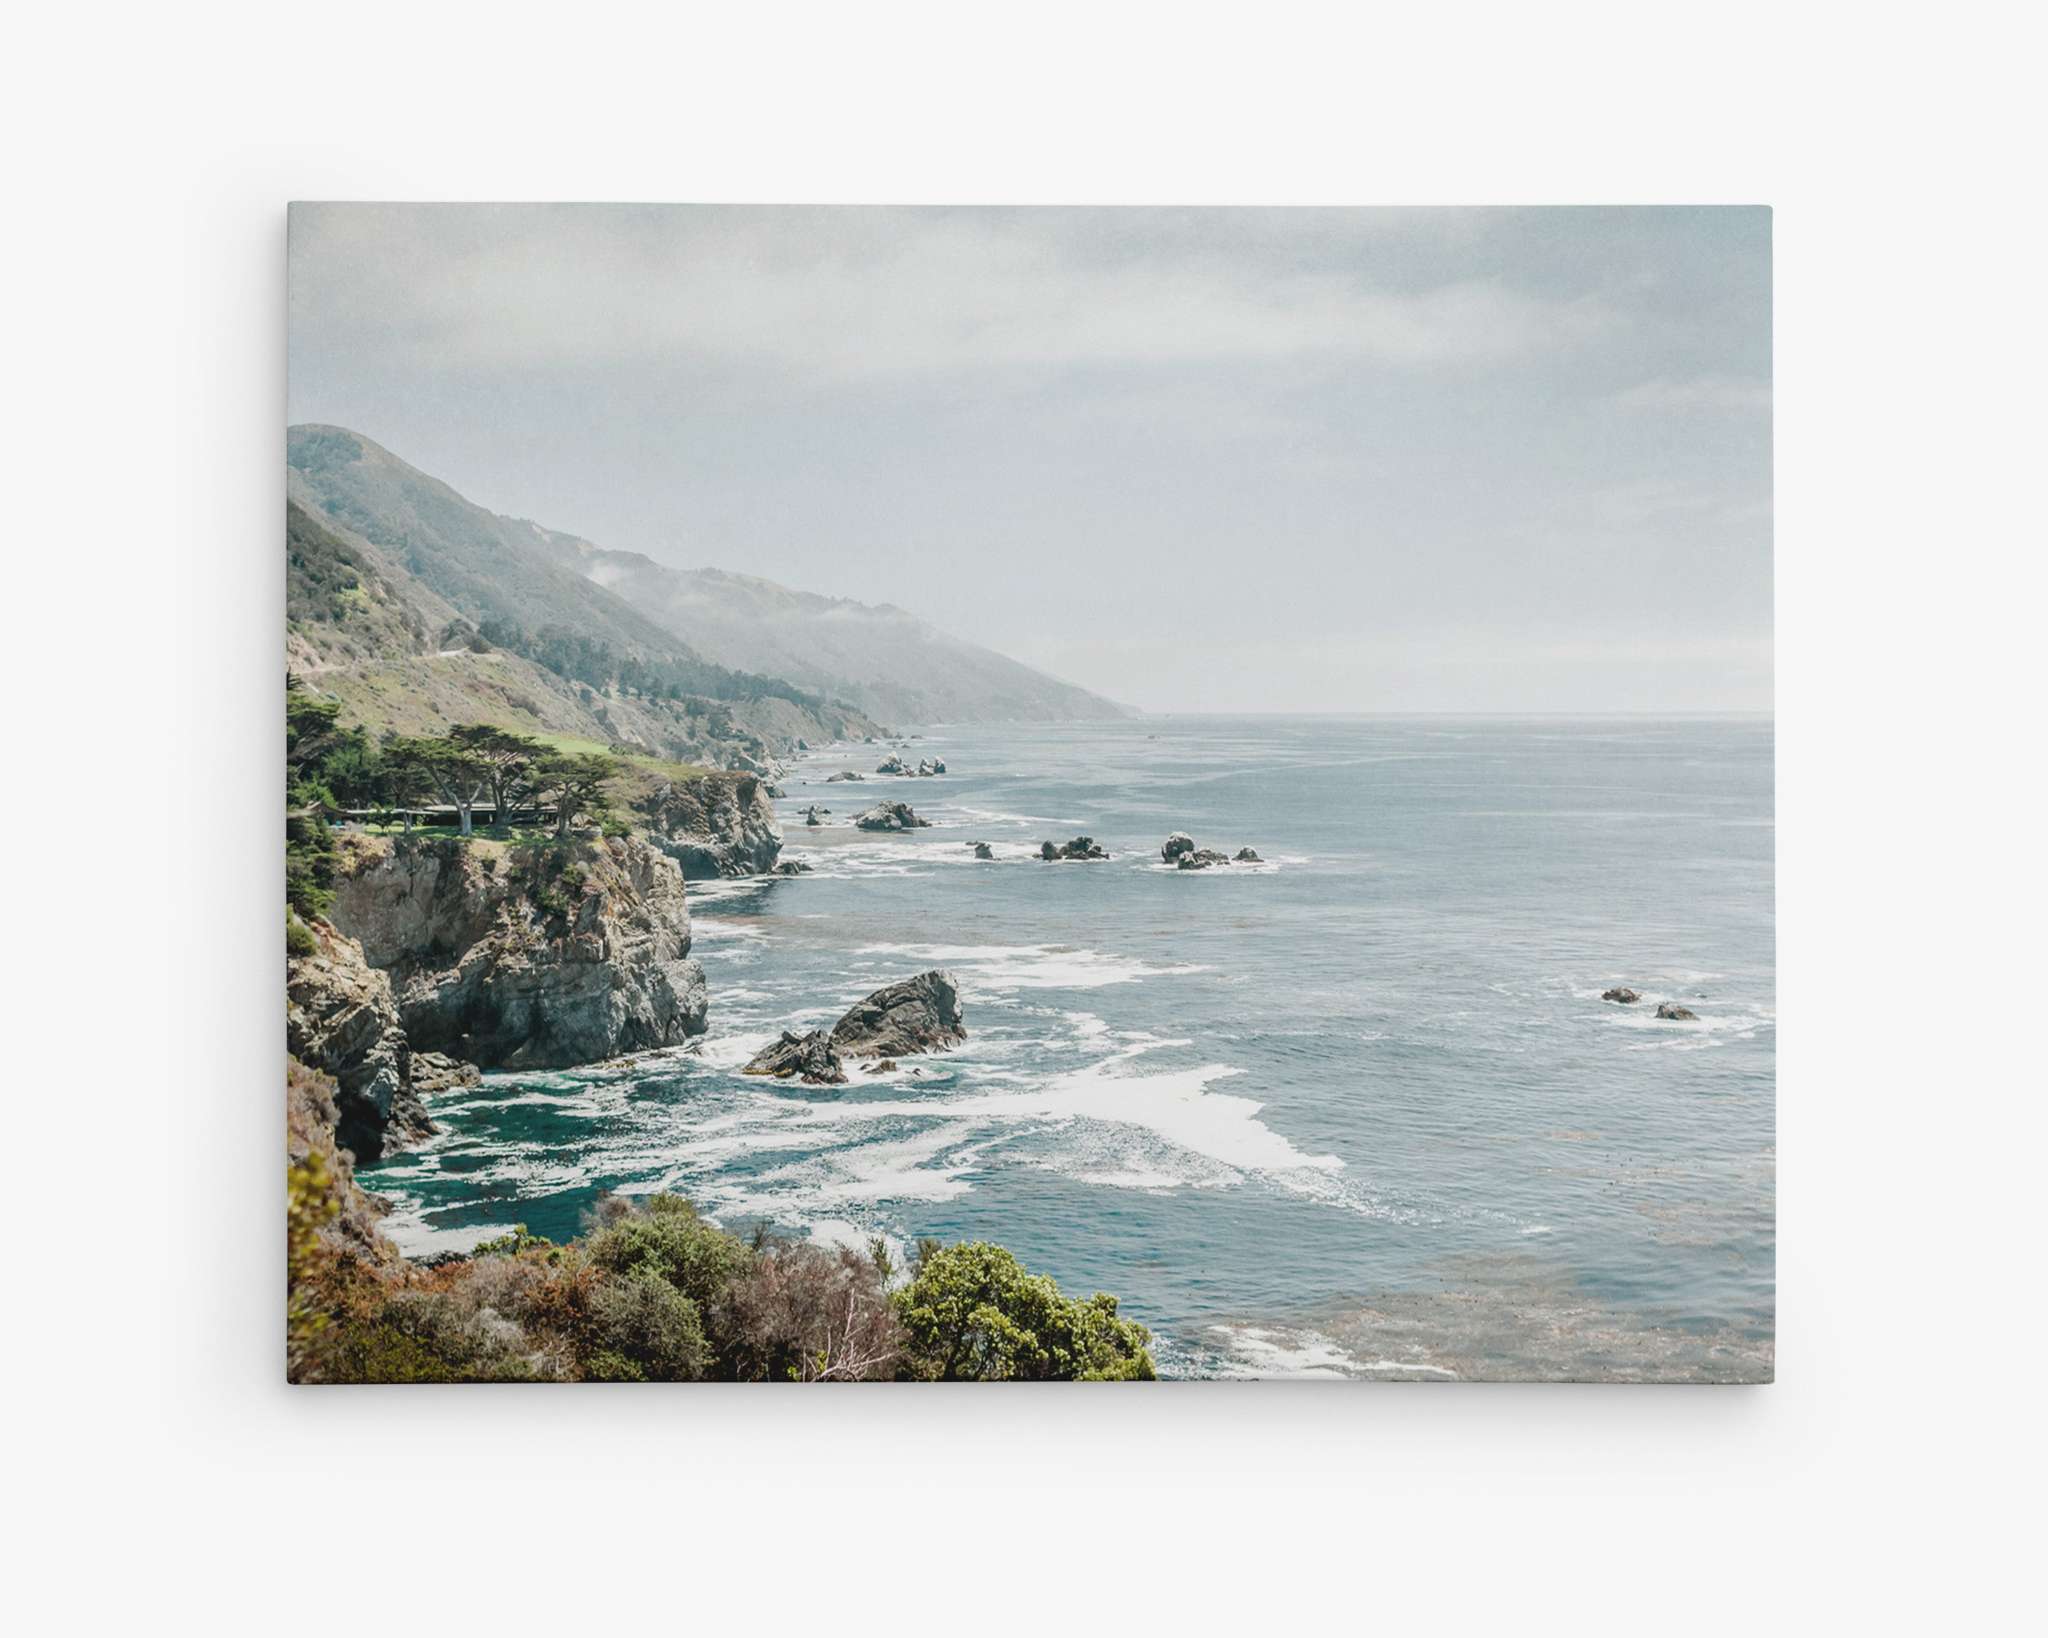 A scenic coastal view with rocky cliffs extending into the ocean under a partly cloudy sky. Waves crash against the shore, and lush green vegetation is visible in the foreground, giving way to mountainous terrain in the distance. This breathtaking coastal scene is perfect for Big Sur Landscape Canvas Wall Art, 'Rocky Rocks' by Offley Green.